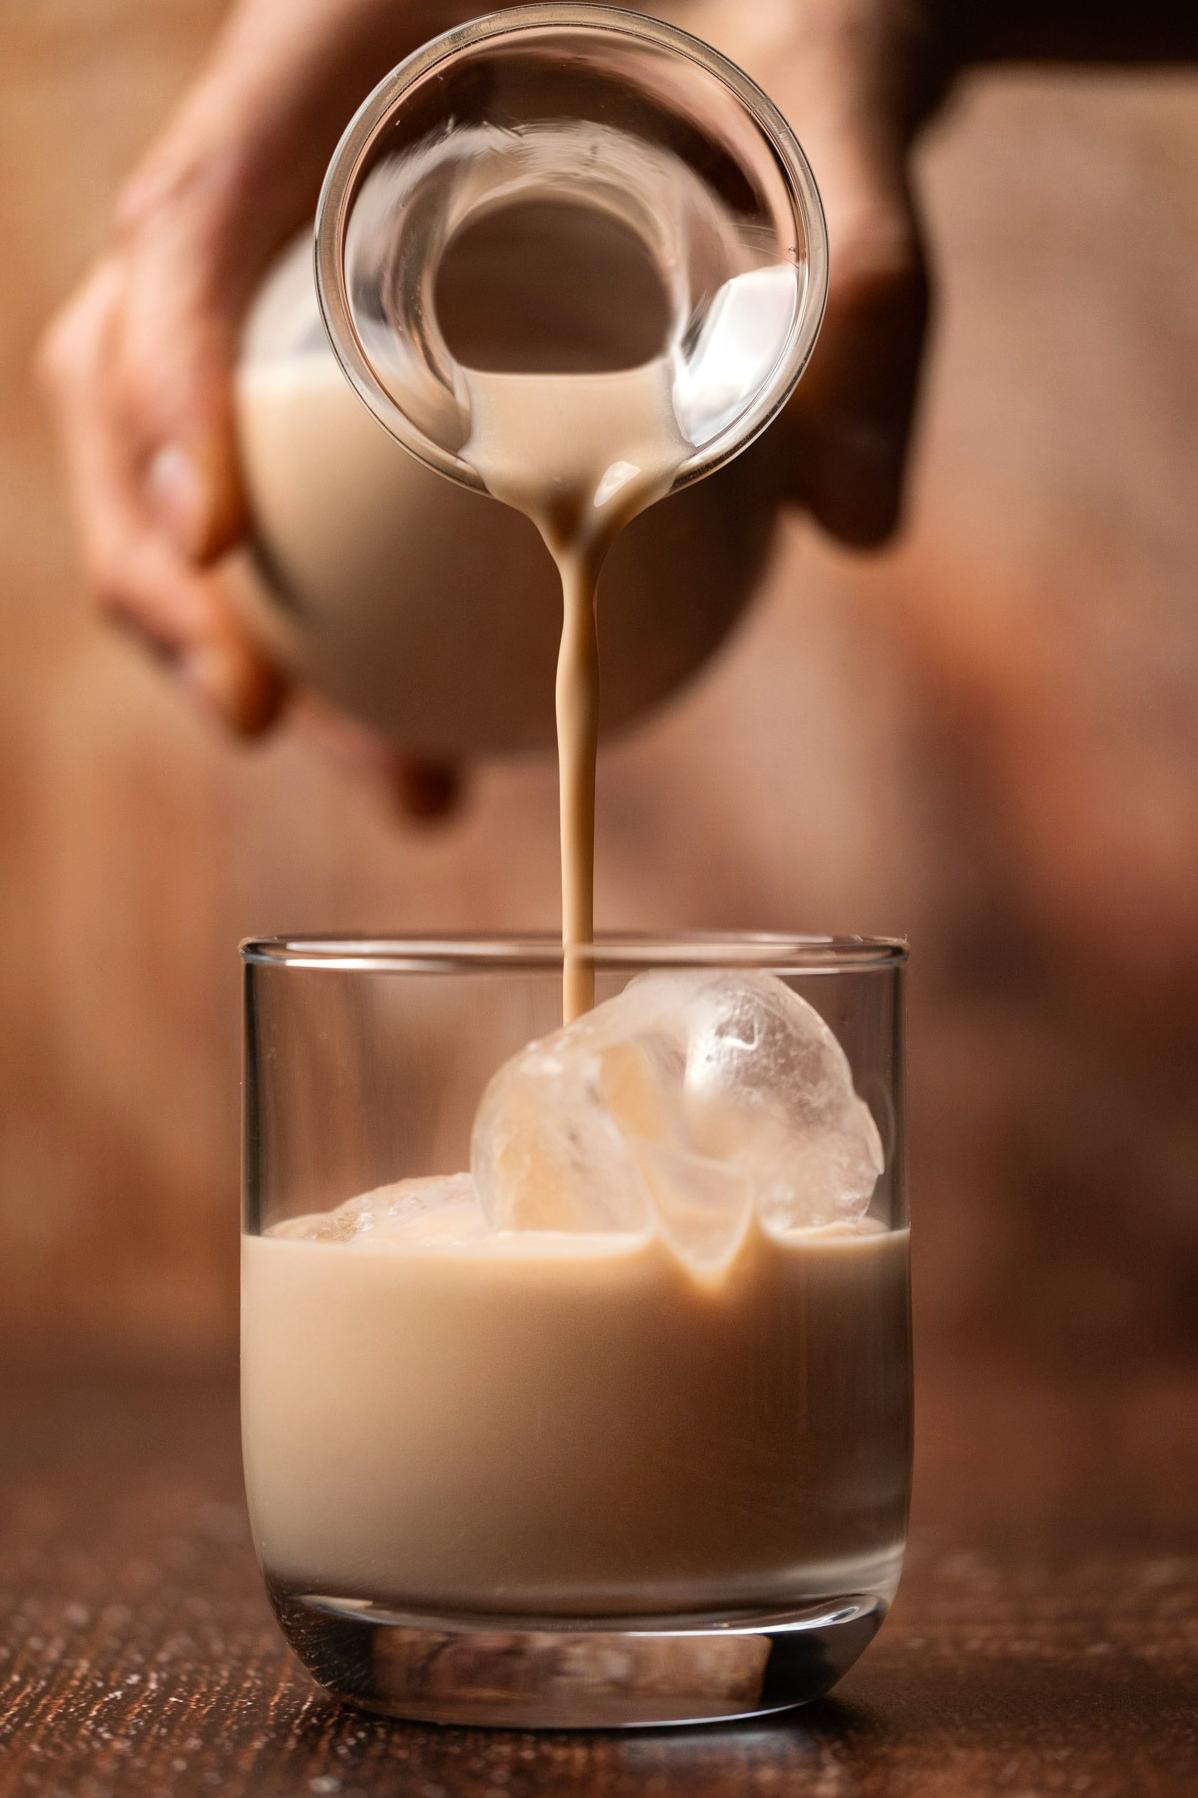  Who needs eggs when you have this delicious eggless version of Irish Cream?